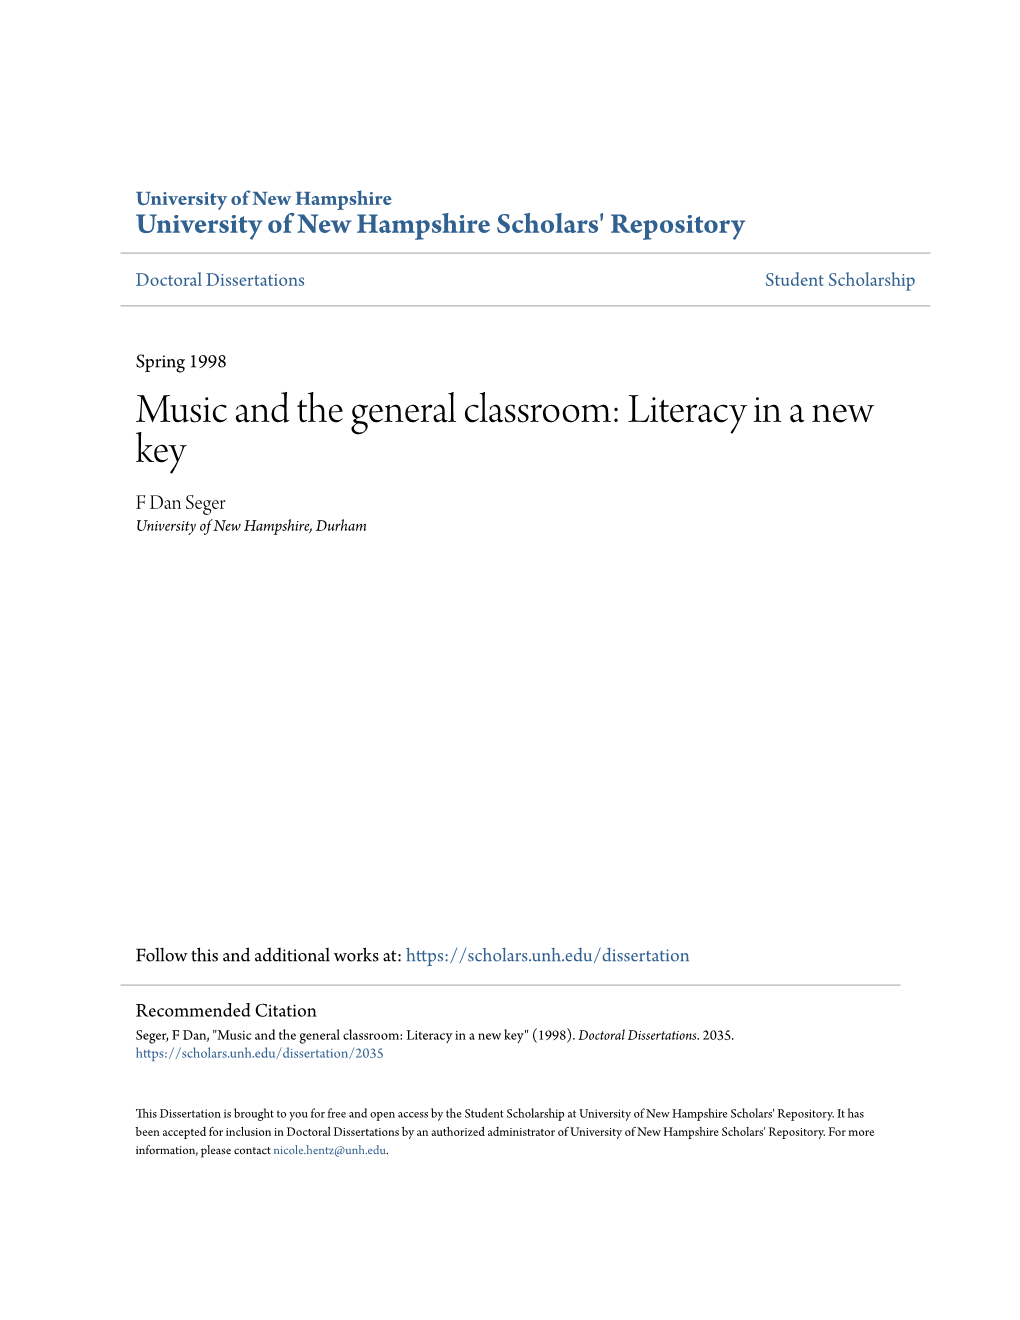 Music and the General Classroom: Literacy in a New Key F Dan Seger University of New Hampshire, Durham